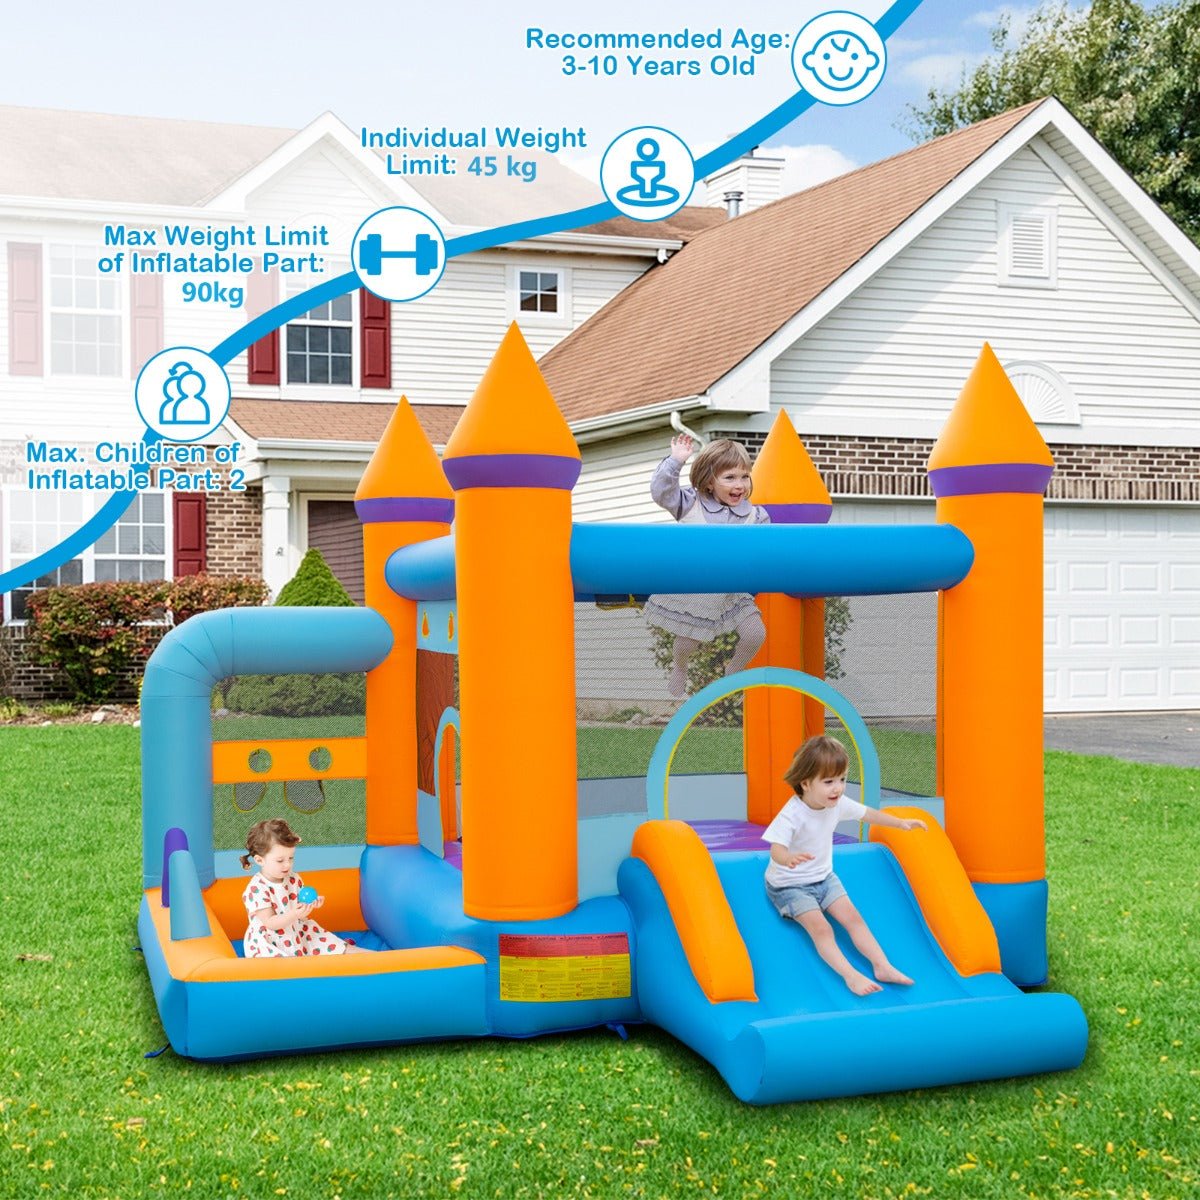 Unleash Excitement with the 5-in-1 Bounce Castle - Shop Now!